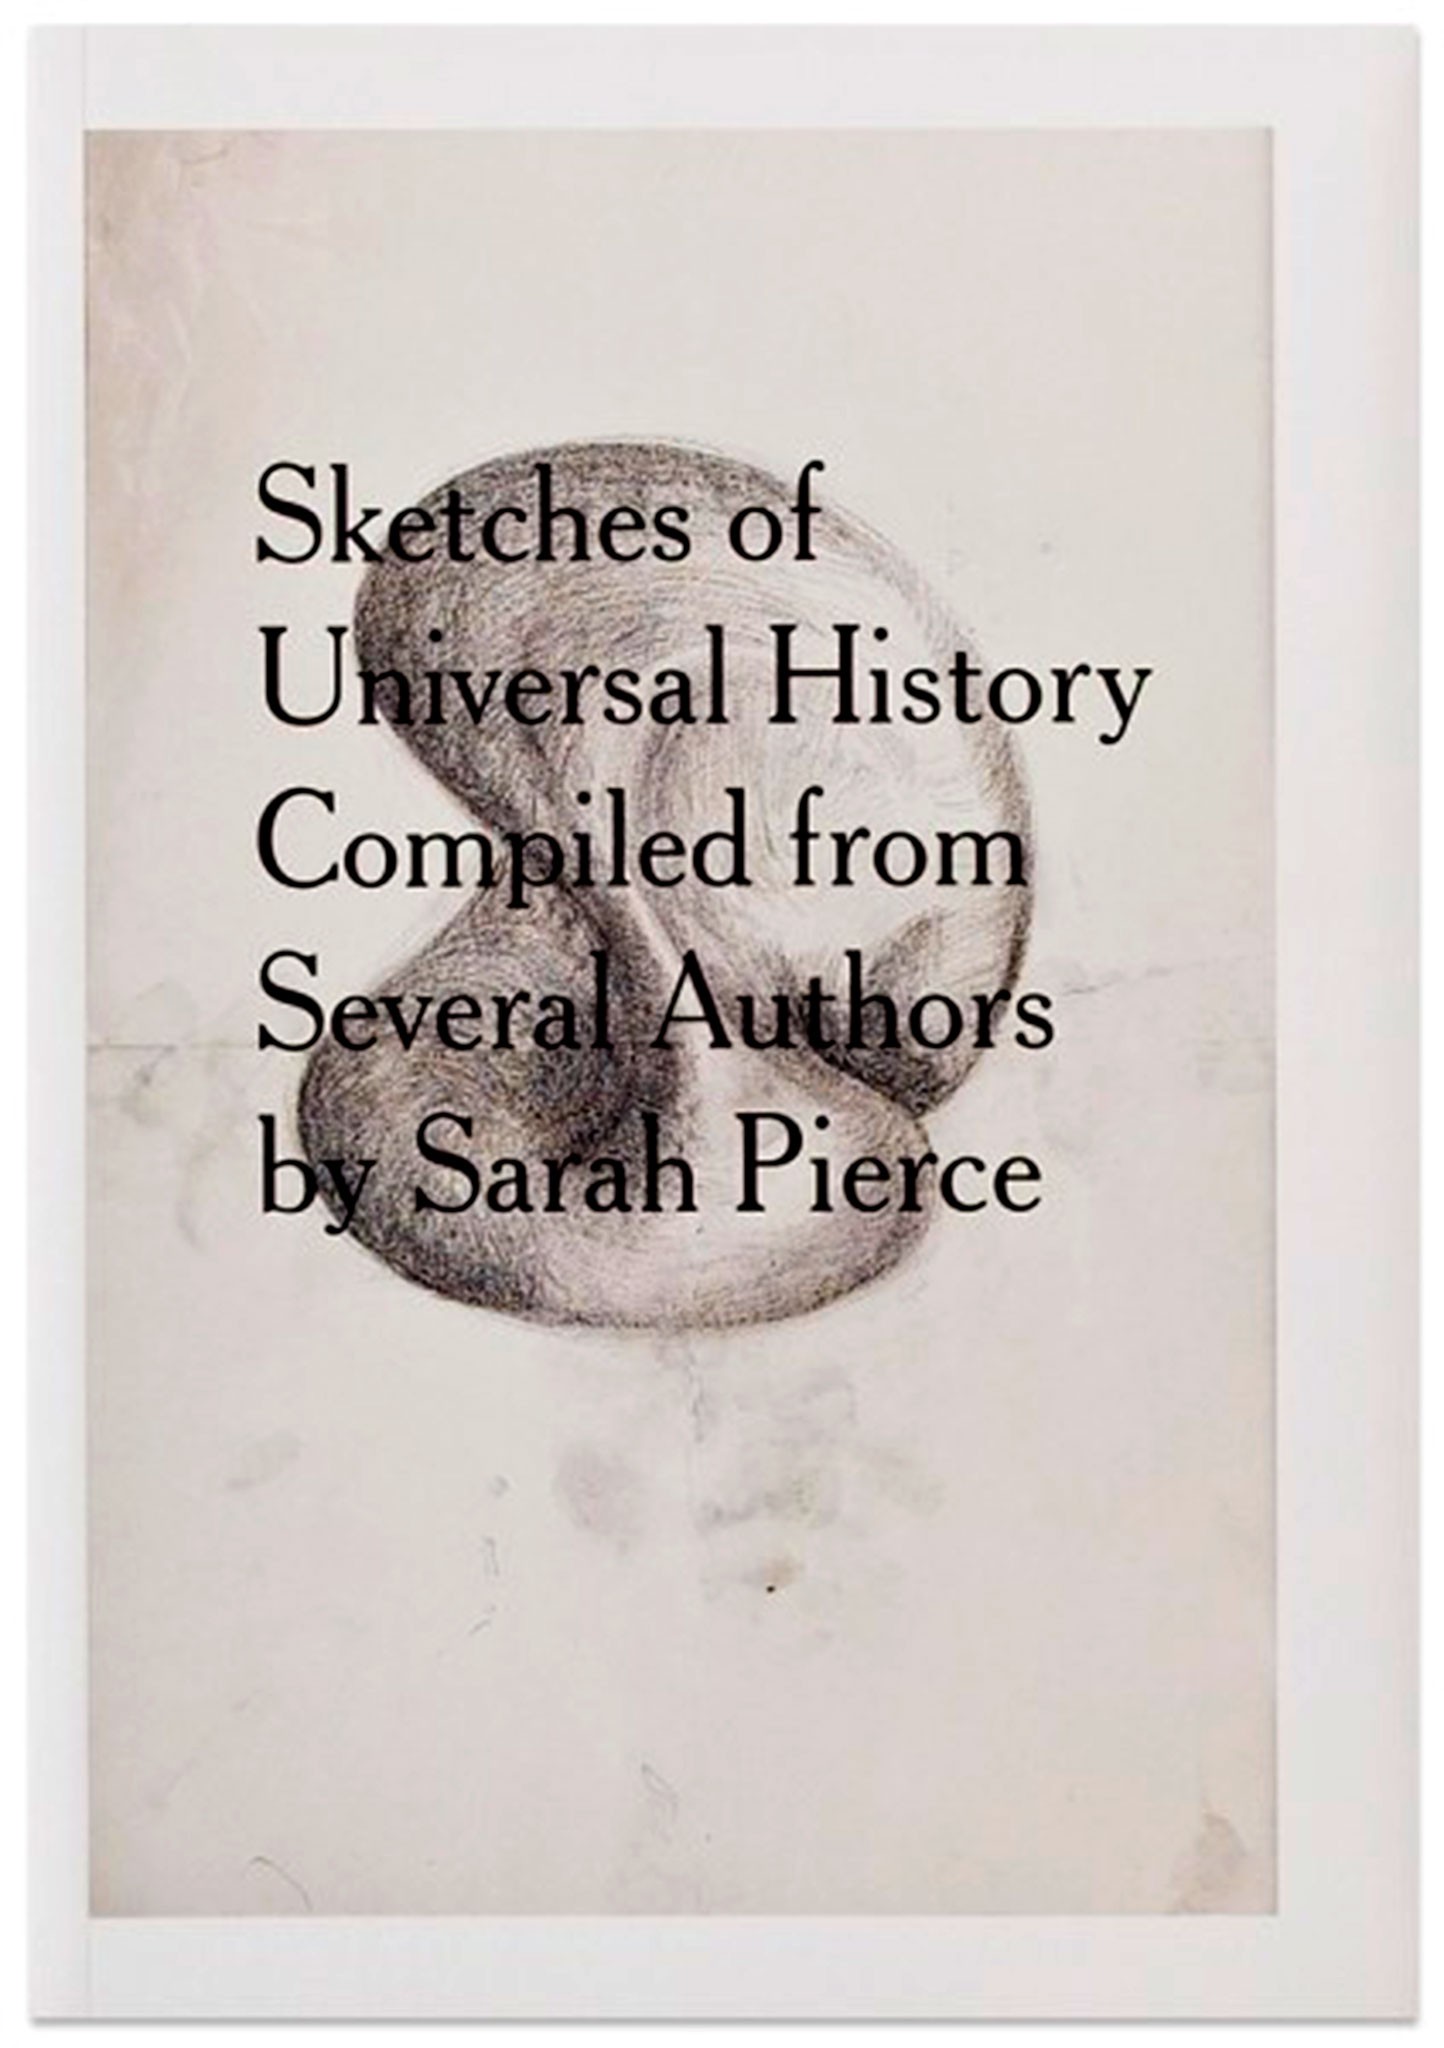 Sketches of Universal History Compiled from Several Authors